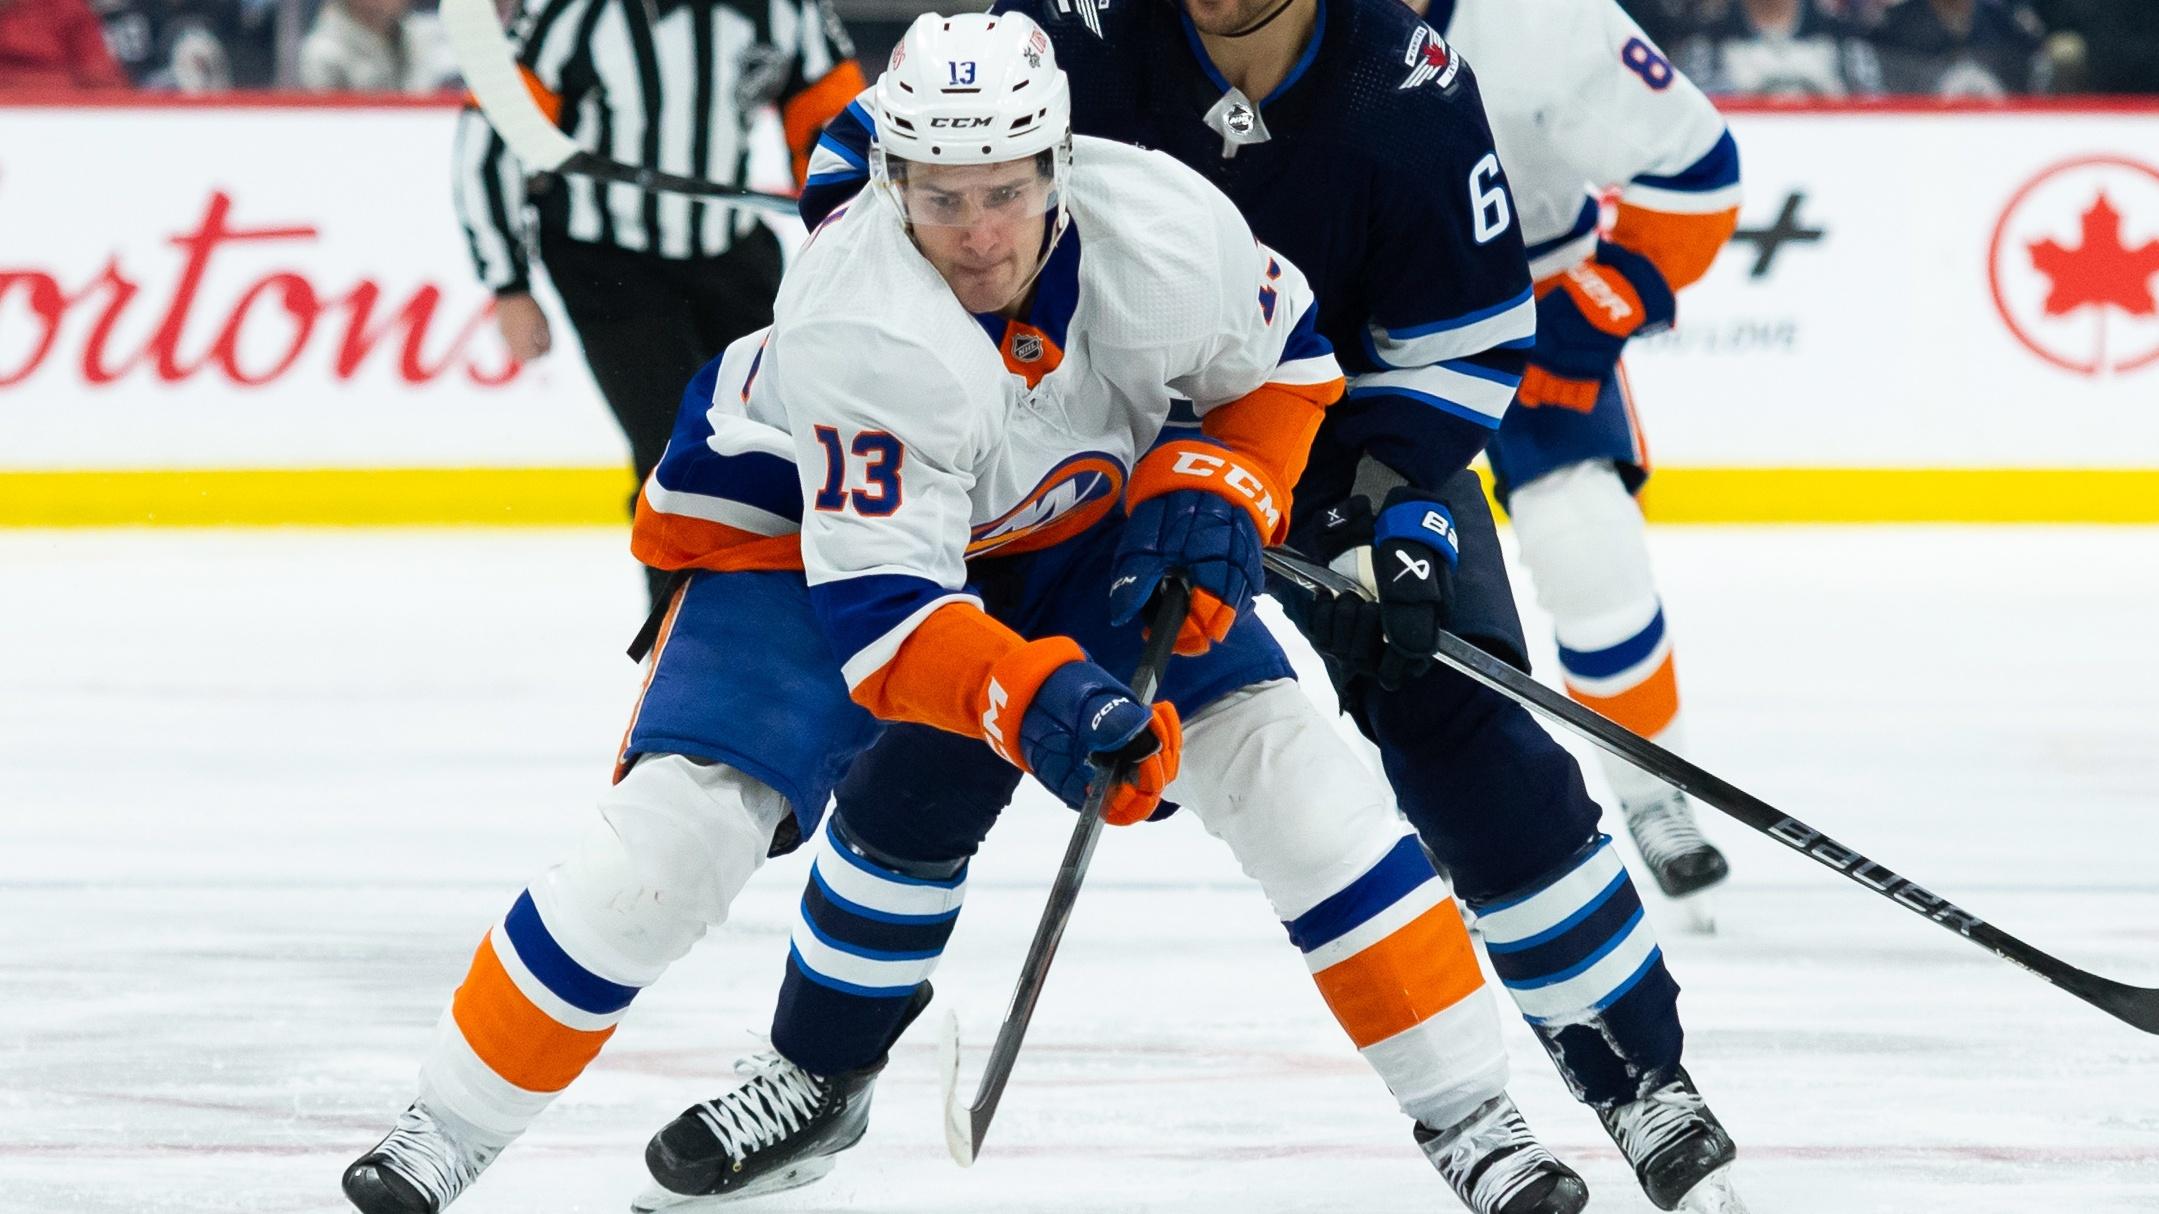 New York Islanders forward Mathew Barzal (13) skates away from Winnipeg Jets forward Nino Niederreiter (62) during the first period at Canada Life Centre / Terrence Lee - USA TODAY Sports